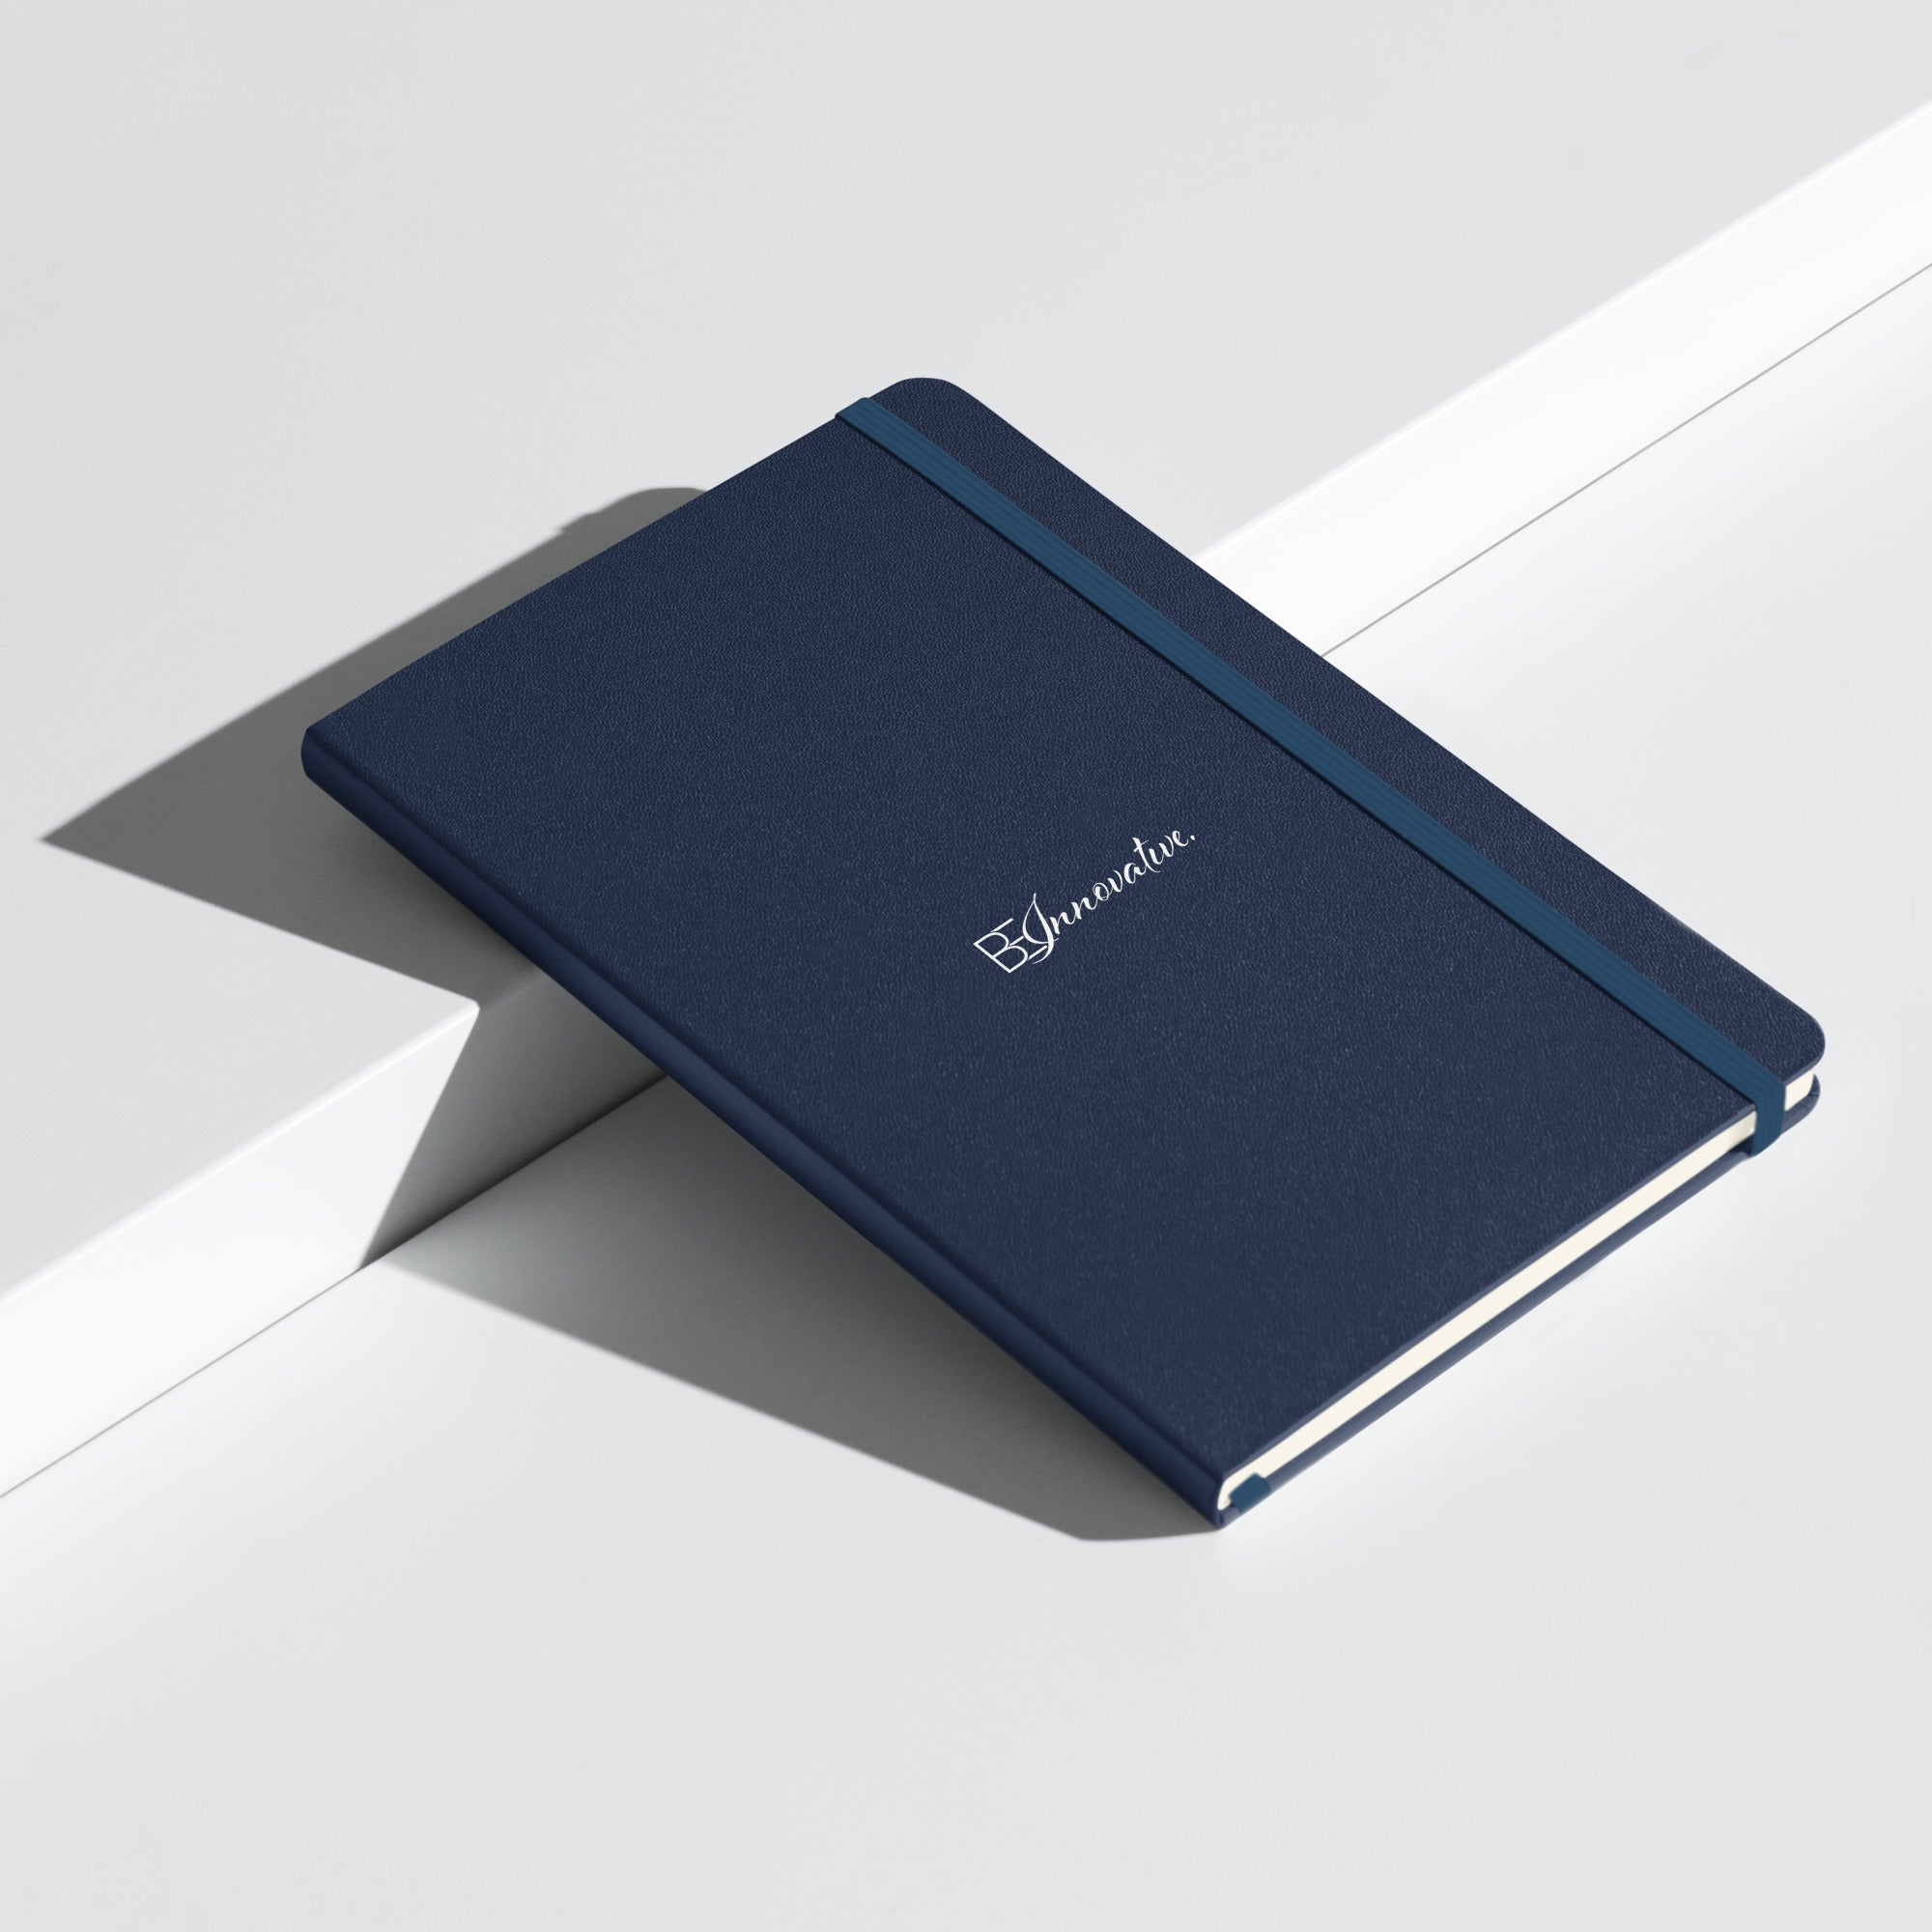 *NEW* "BE INNOVATIVE" Hardcover Bound Notebook